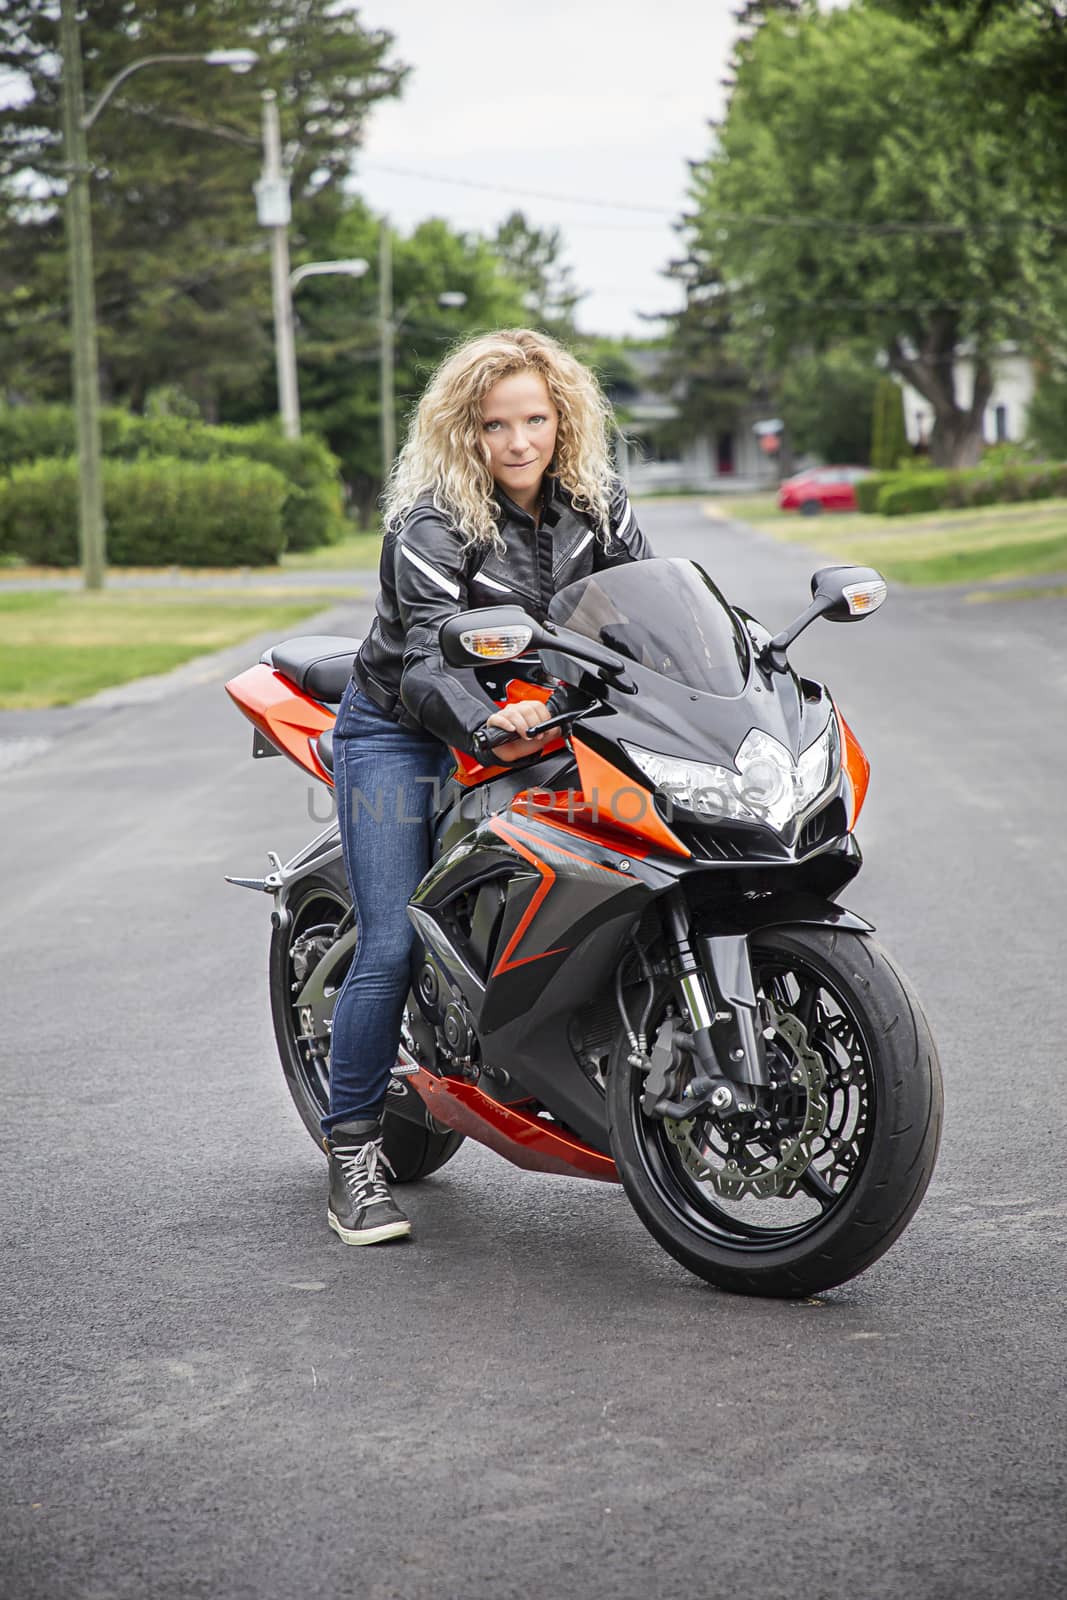 young blond woman, ready to ride a sport motocycle, in the middle of a suburb street